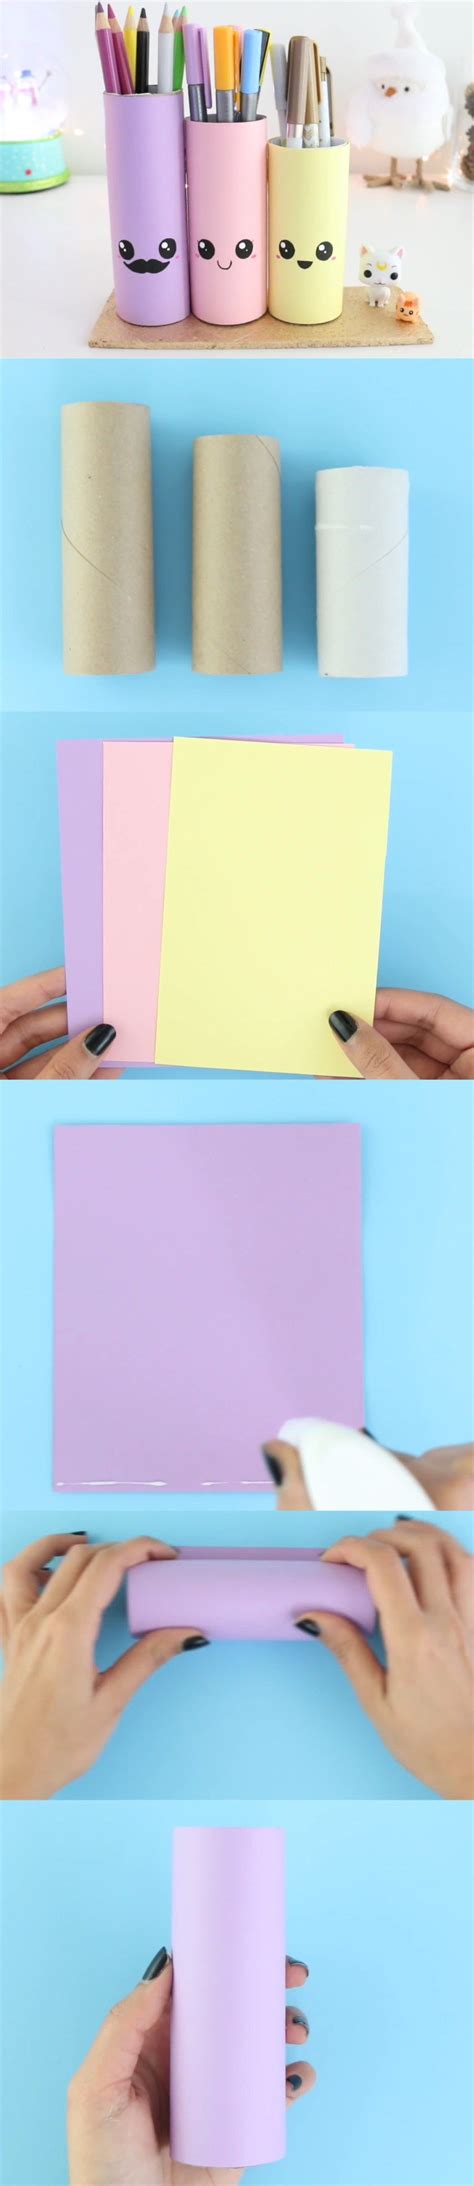 11 Awesome Diy Crafts You Must Try Kisses For Breakfast Kawaii Diy